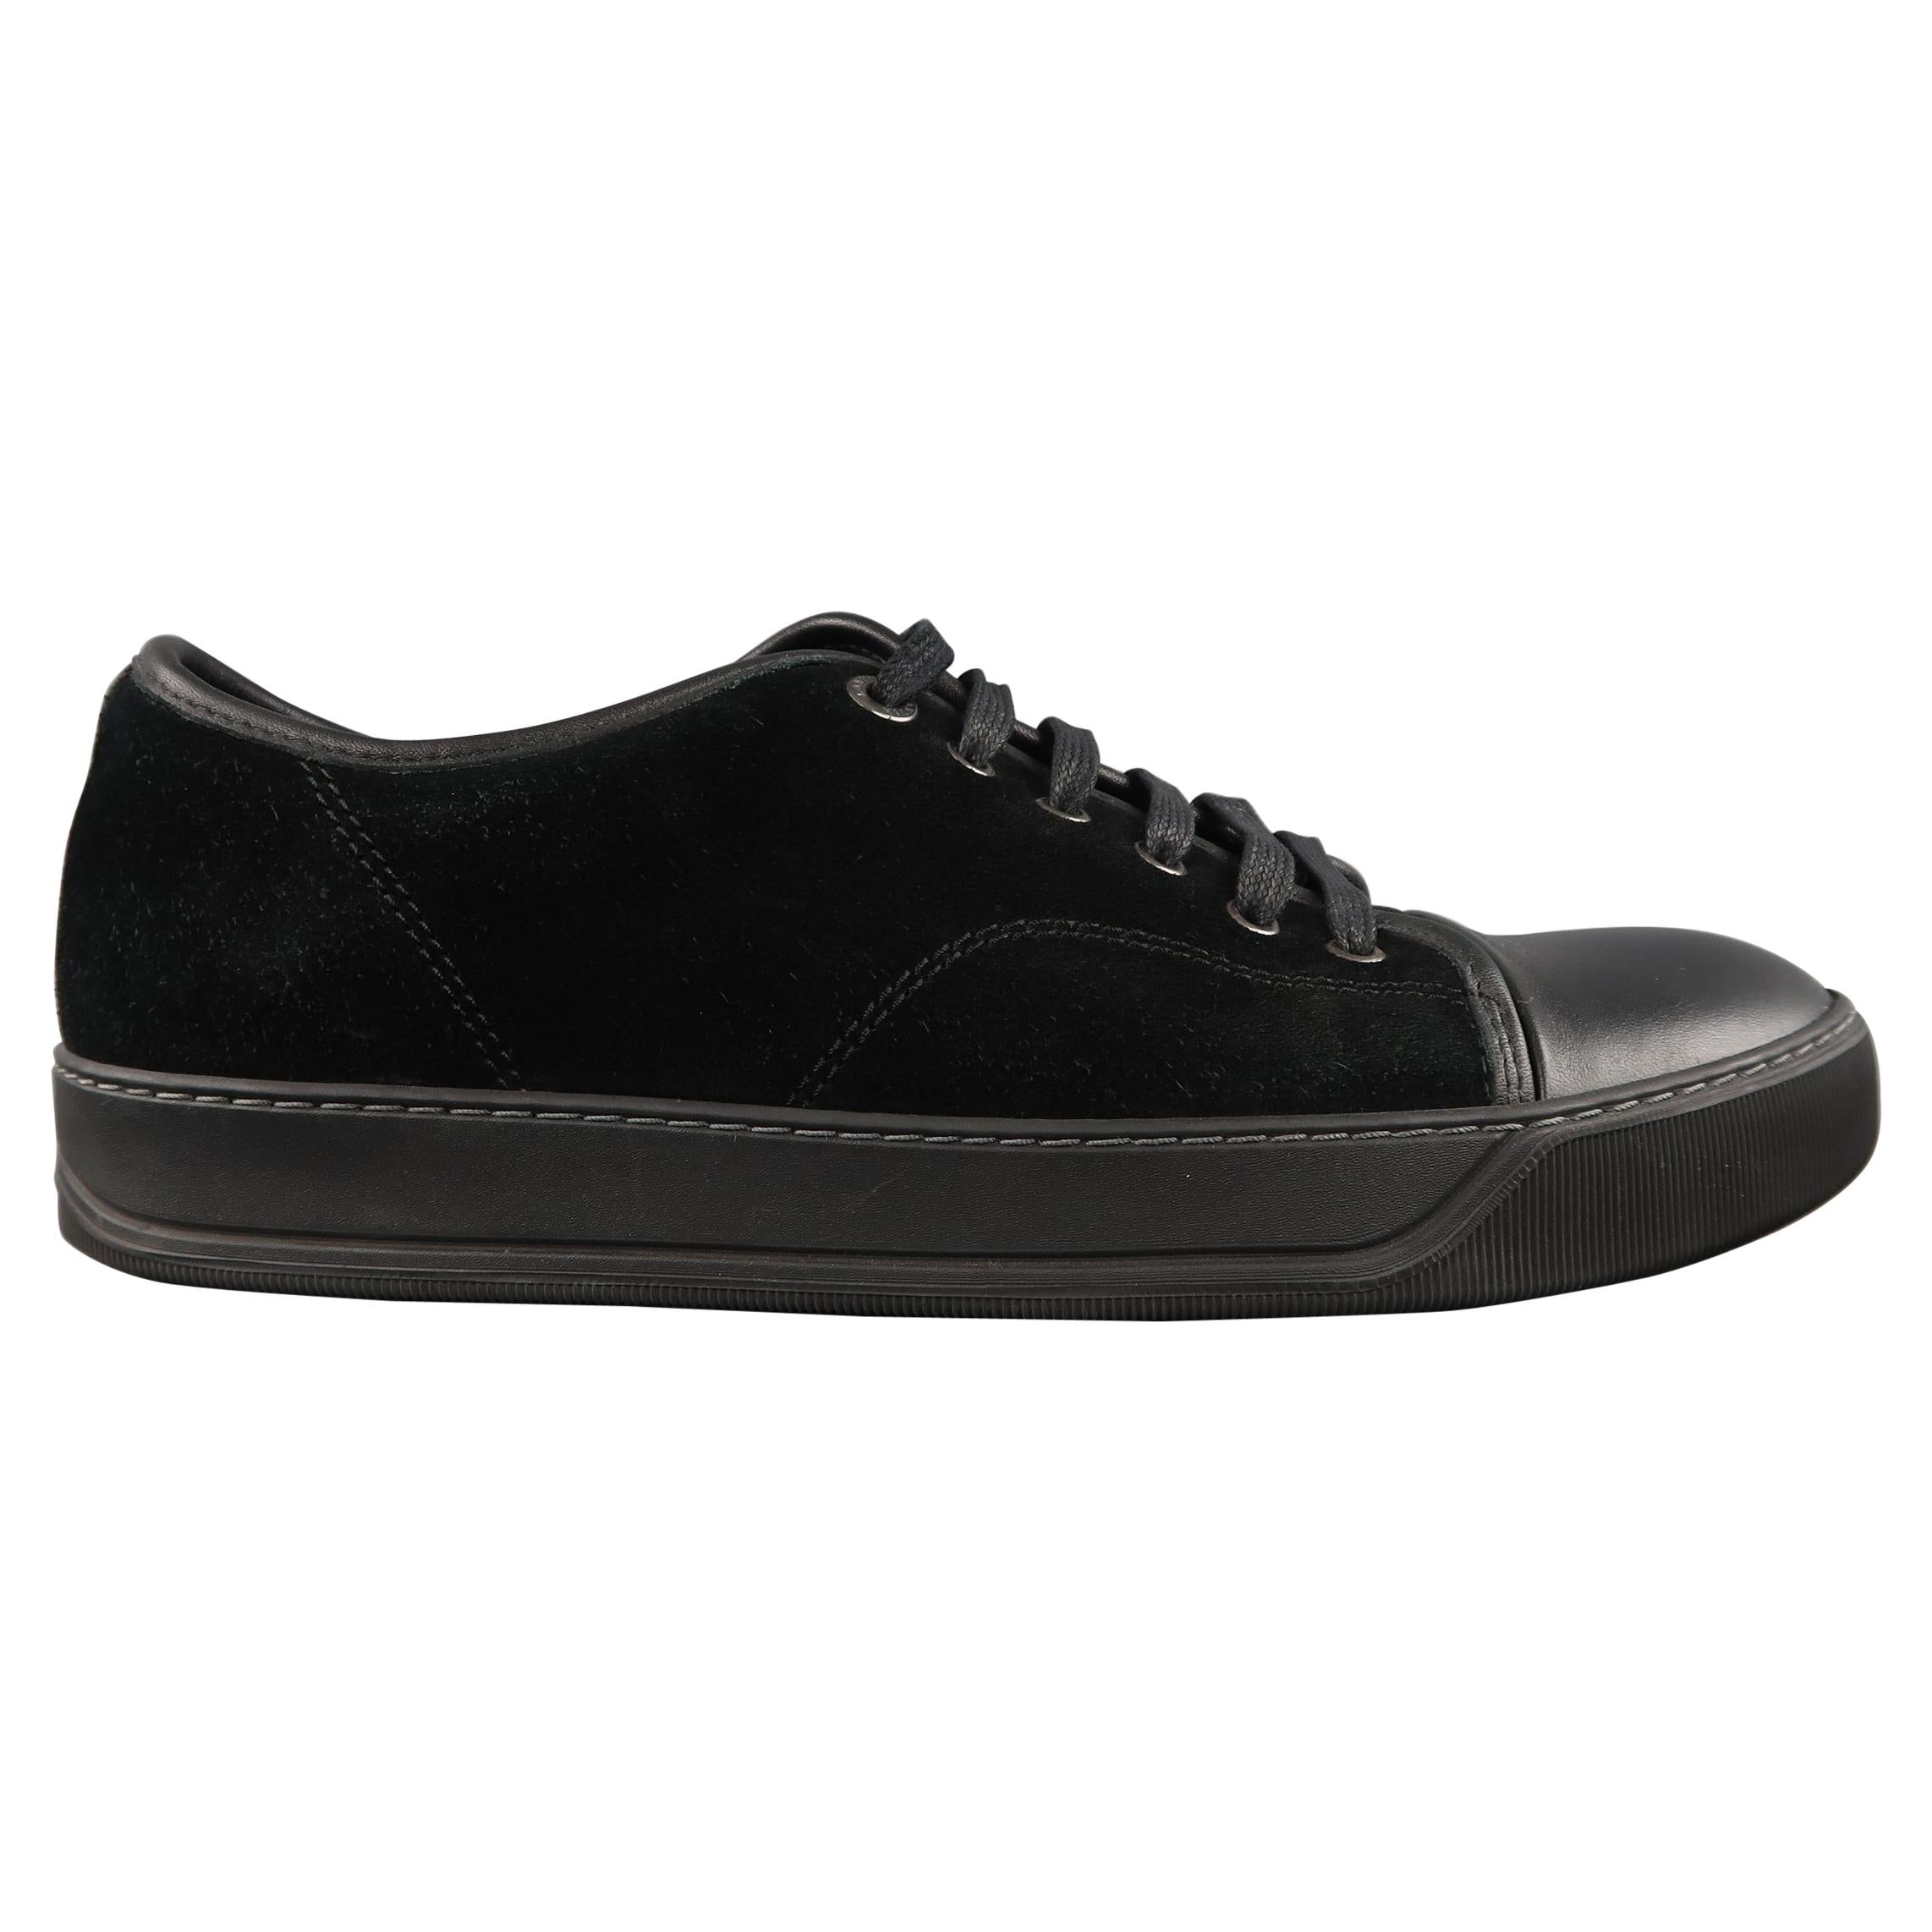 LANVIN Size 8 Black Suede & Leather Low Top Sneakers